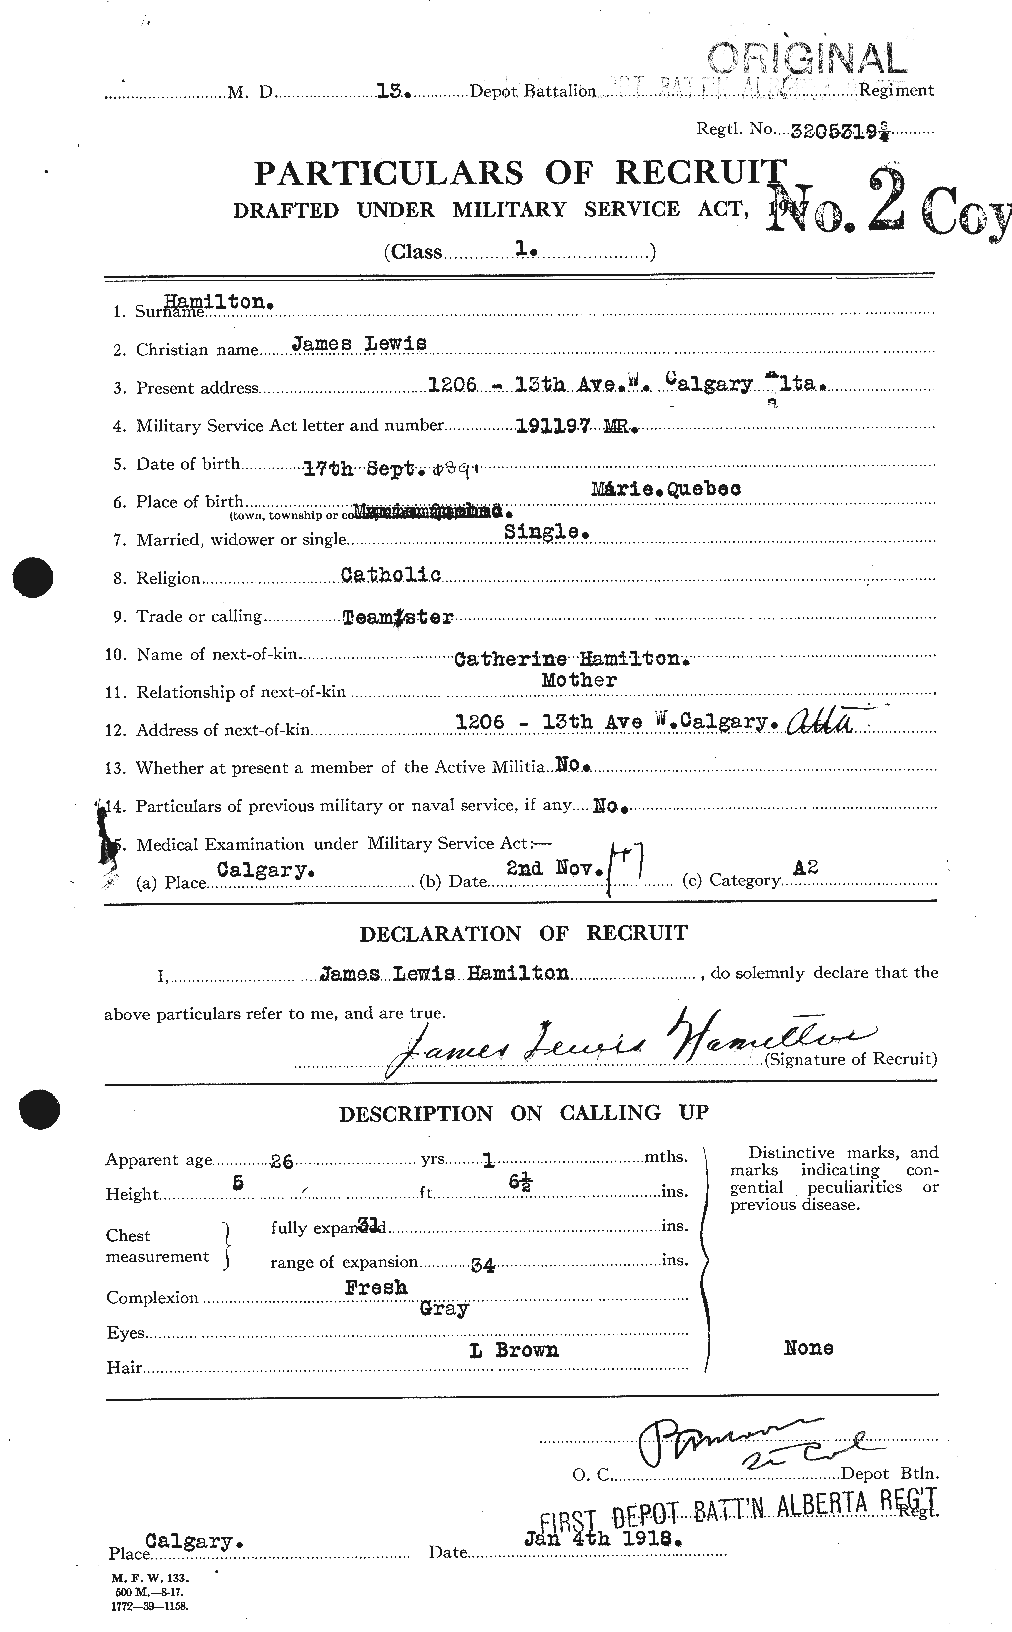 Personnel Records of the First World War - CEF 372988a